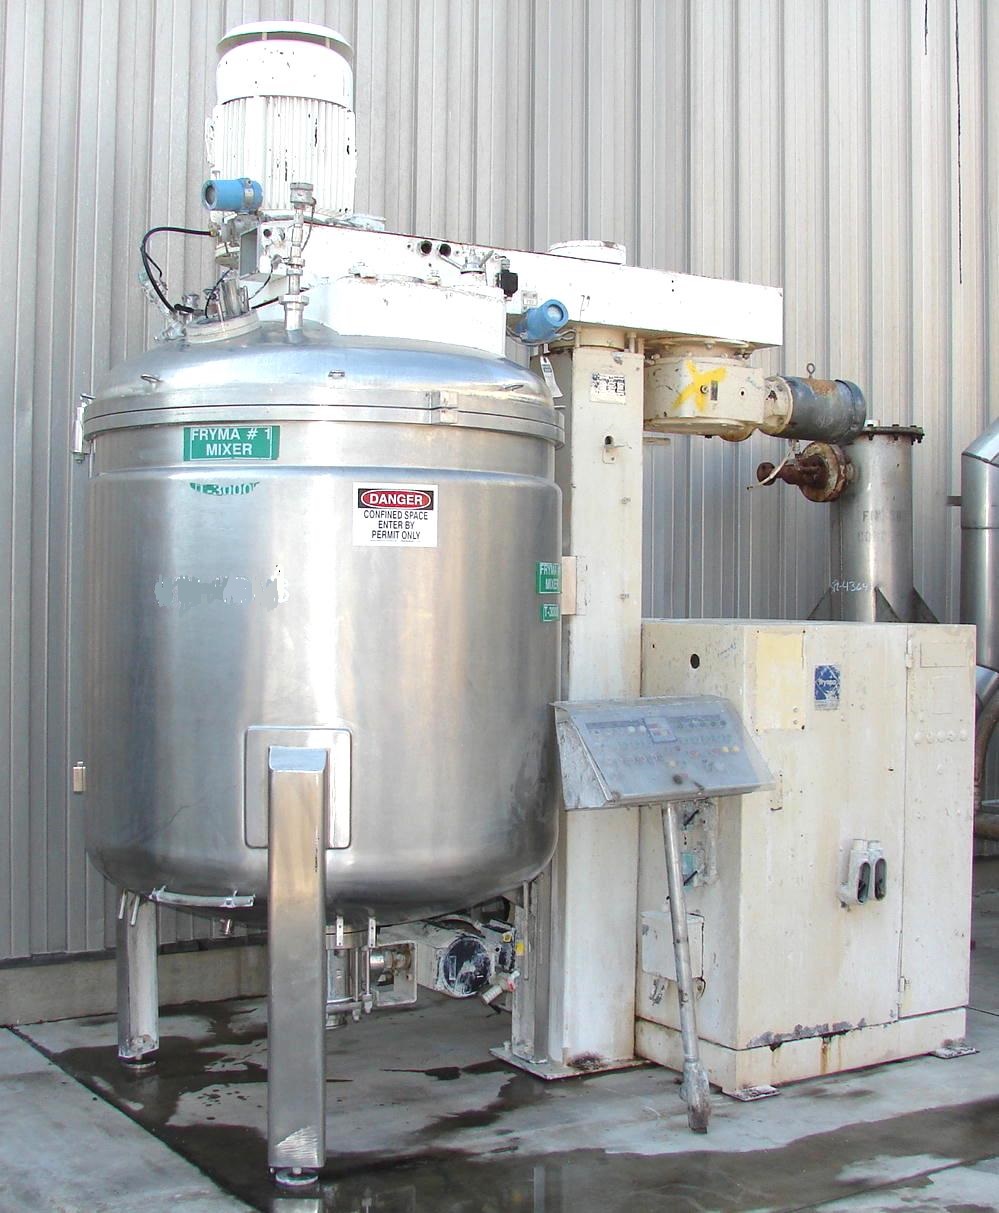 ***SOLD***used 2400 liter Fryma VME-2400 Vacuum Processing Vessel/Kettle, Dual Shaft, Sanitary construction, 2400 Liter (630 Gallon) working capacity. There are two agitator drives. A 7.5 hp motor drives a center 3 blade counter rotating agitator and a scrape agitator through a chain drive. A 50 hp motor drives a disperser type agitator off to the side of the center shaft. Working temperatures are 150 Deg.C (302 Deg.F.)for the interior and the jacket. The interior has a pressure rating of -1/+1 bar and the jacket has a 2.5 bar rating. The top has an 8